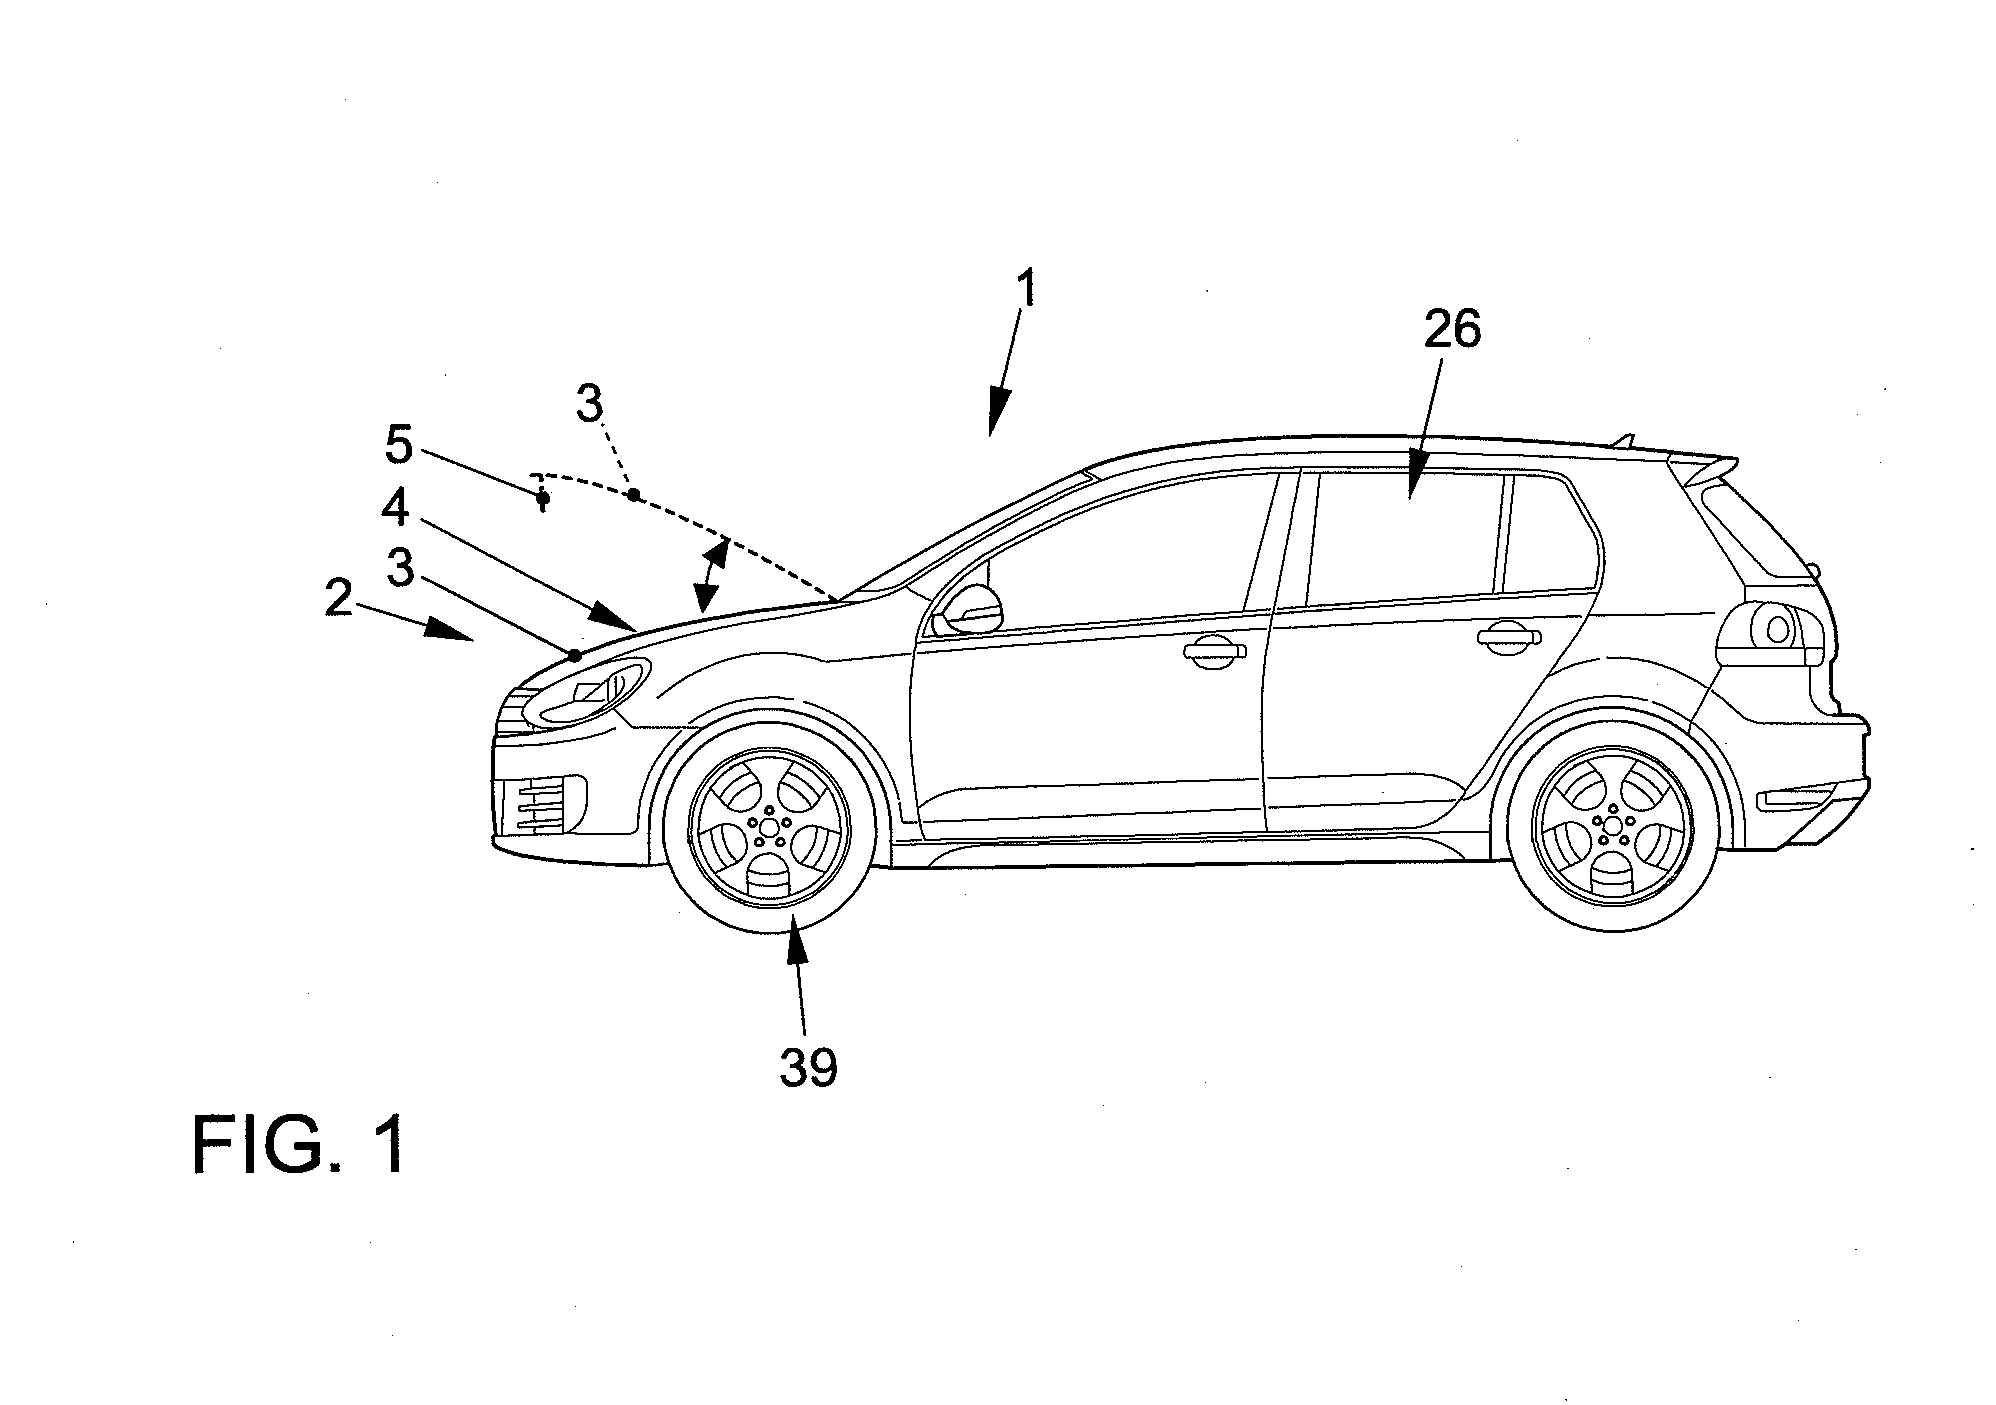 Emergency release locking system, vehicle thereto, and method for operating the locking system